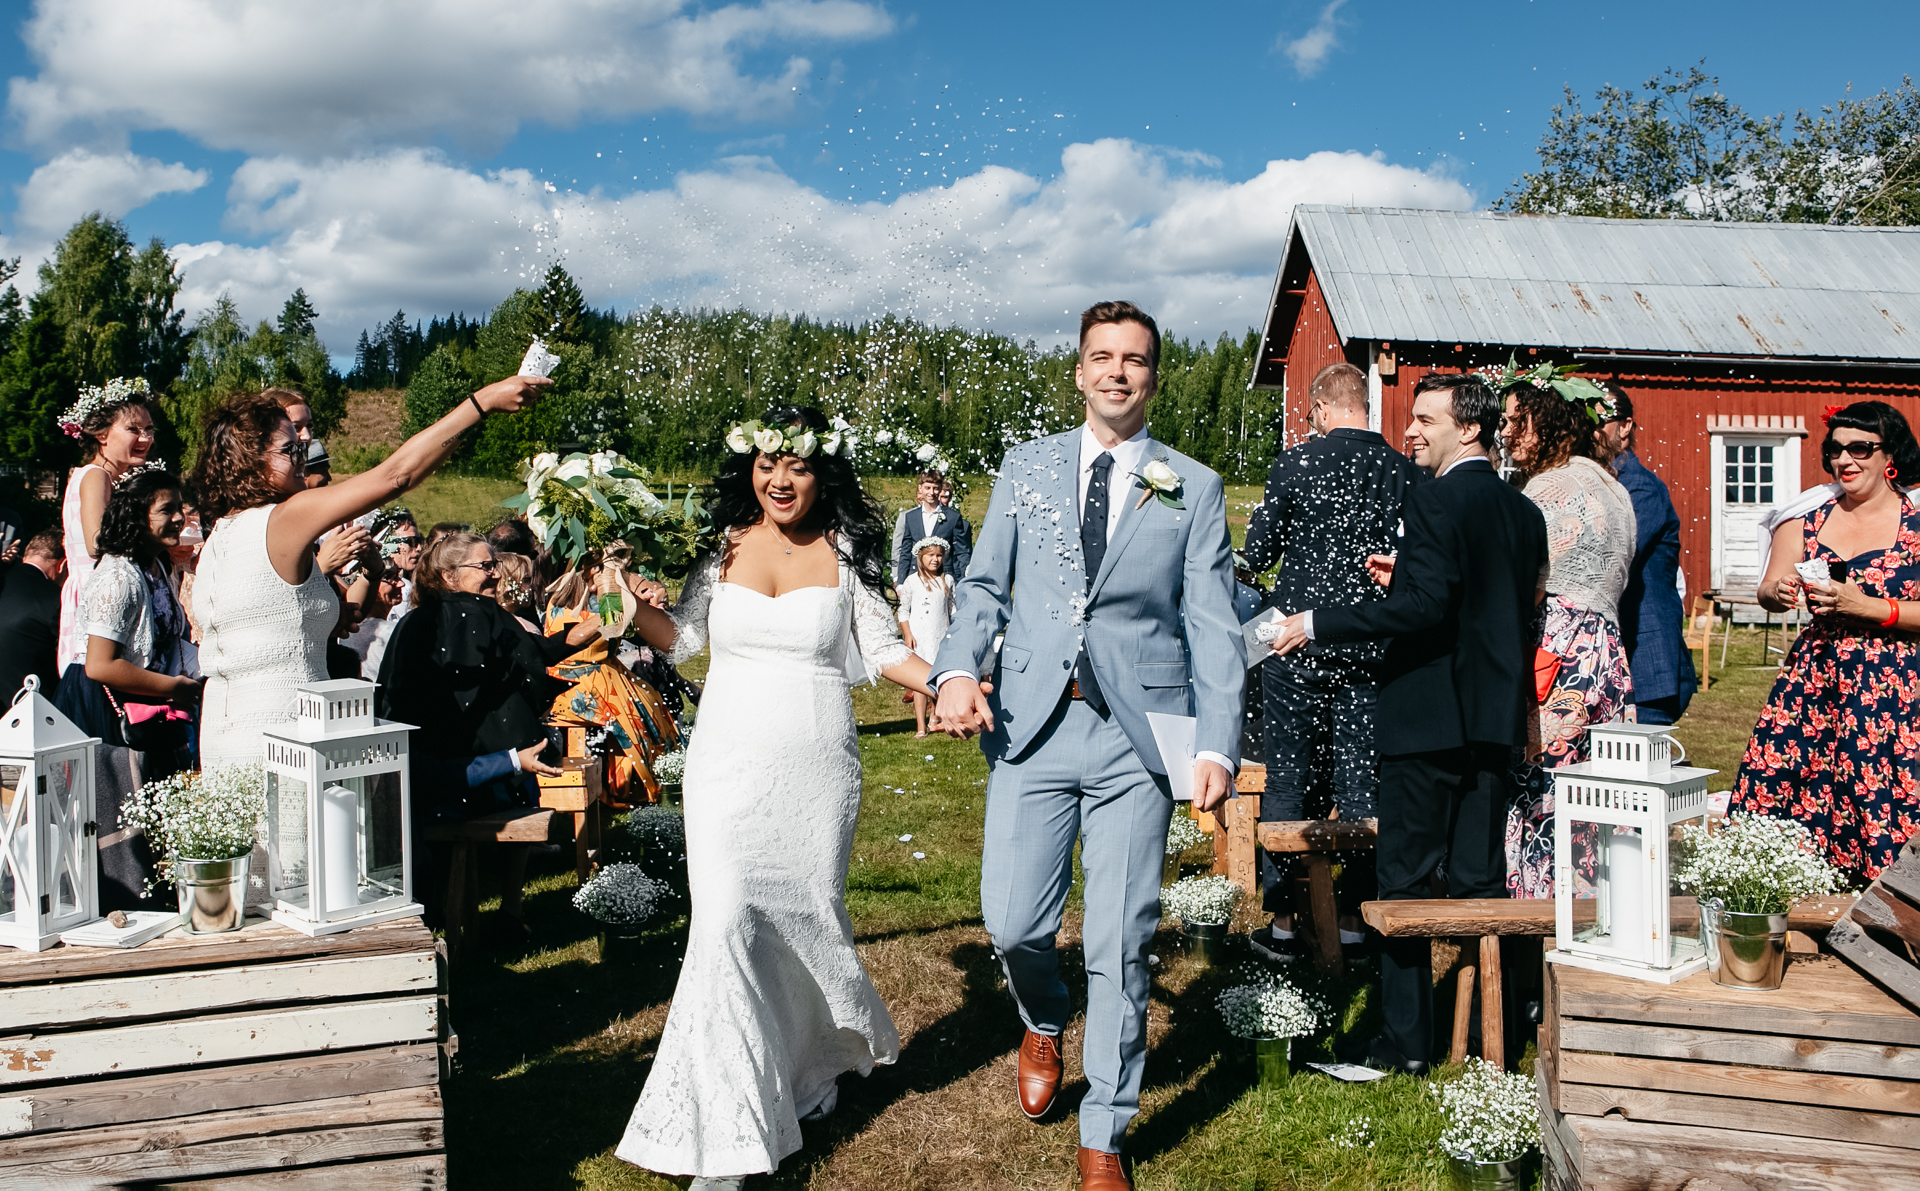 The Directory - Your guide to planning a Norrland wedding. 